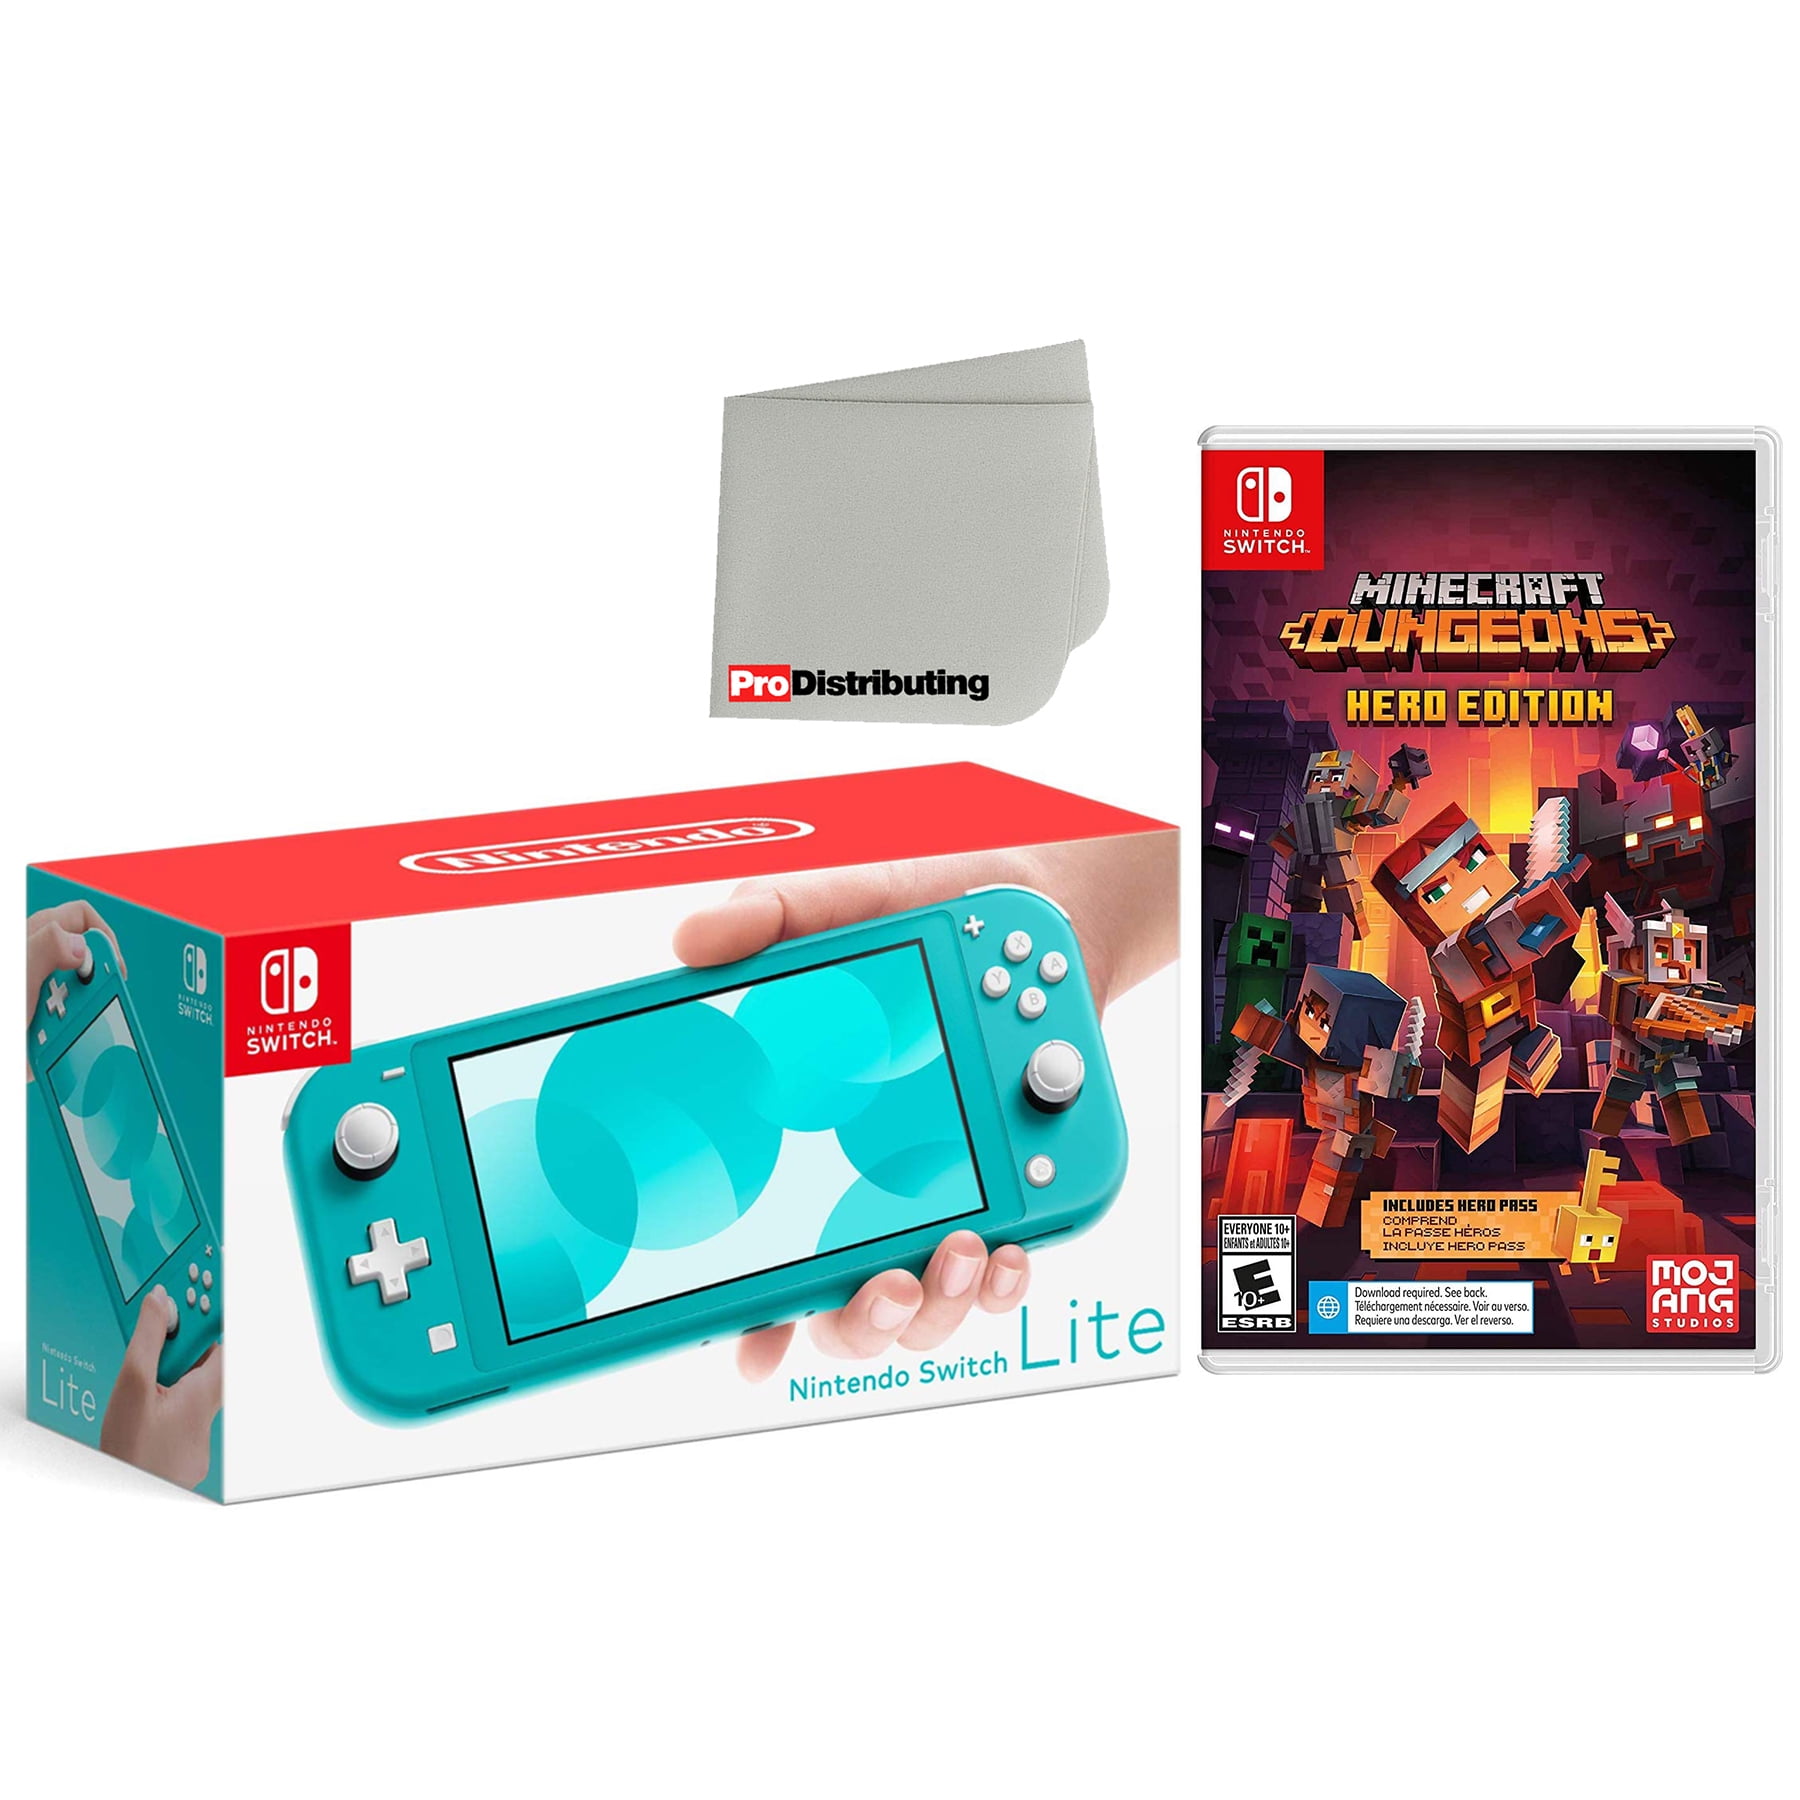 Nintendo Switch Lite 32GB Handheld Video Game Console in Turquoise with  Minecraft Dungeons Hero Edition Game Bundle 